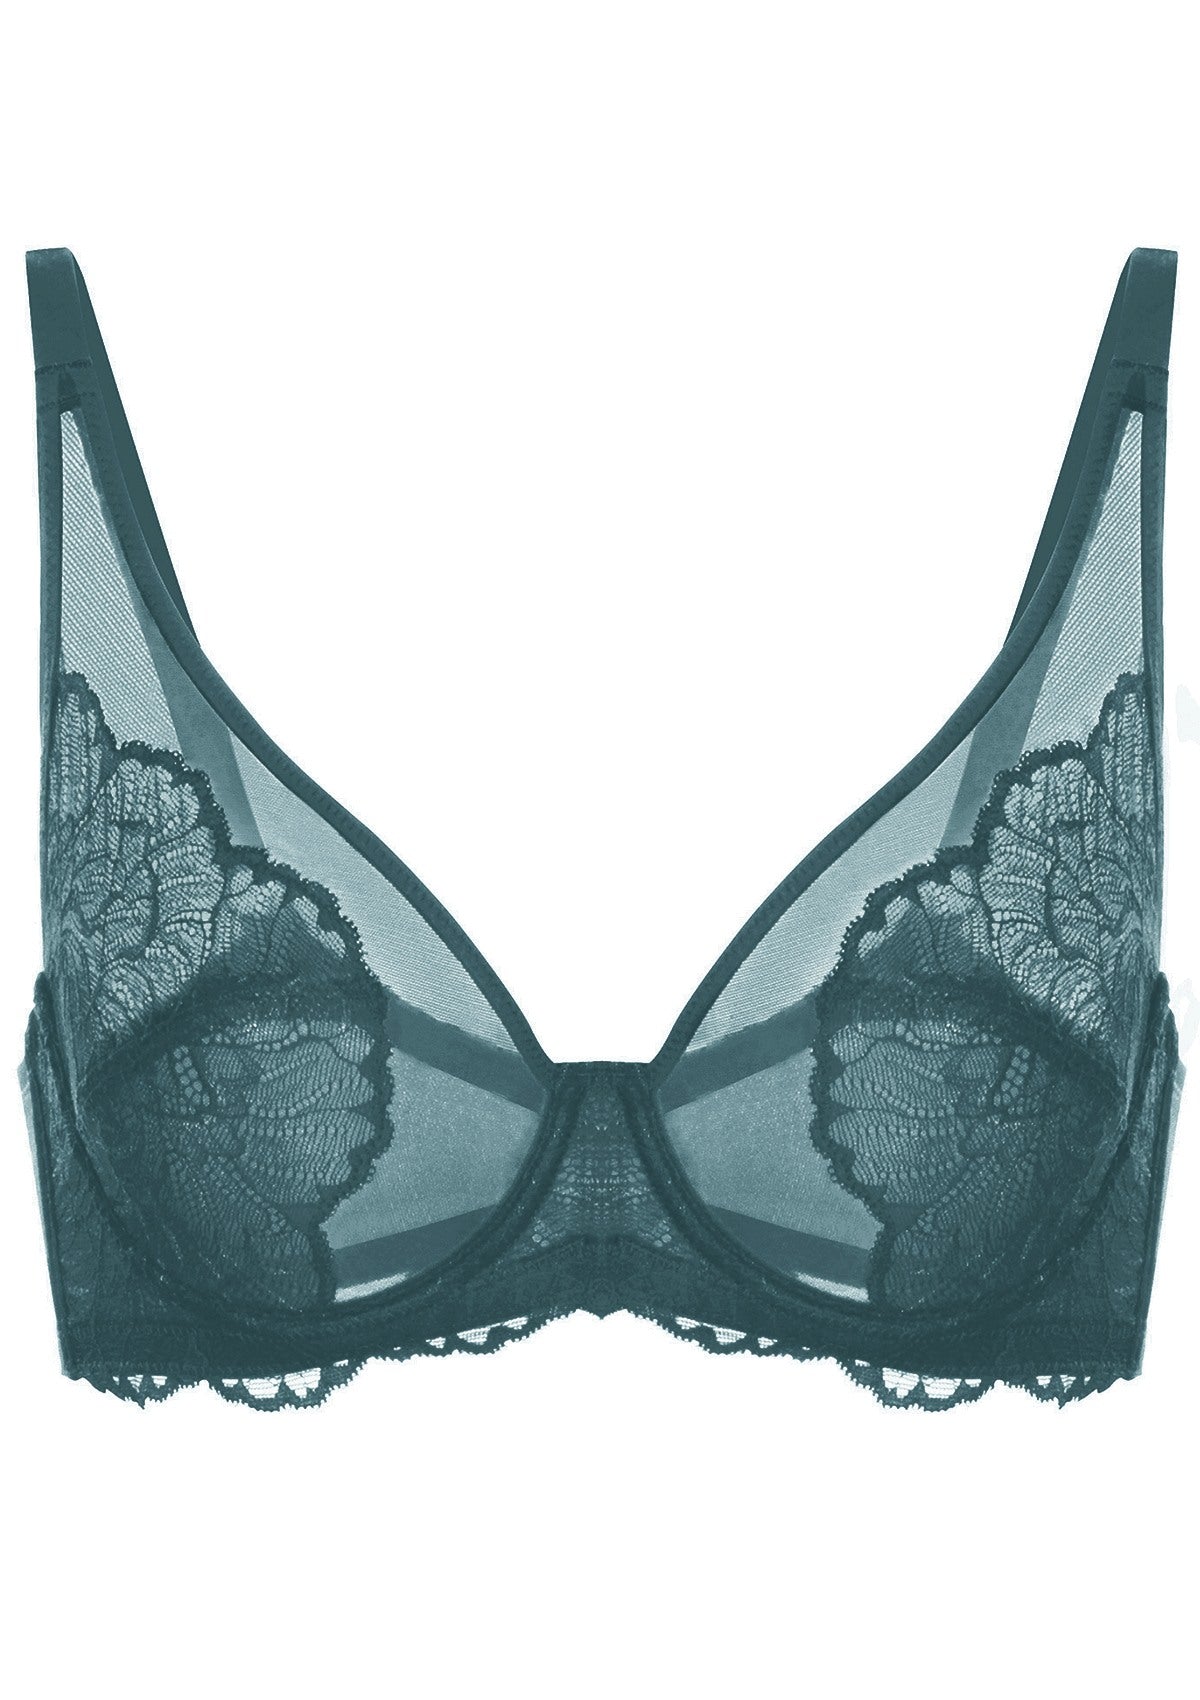 HSIA Blossom Full Figure See-Through Lace Bra For Side And Back Fat - Biscay Blue / 38 / DDD/F